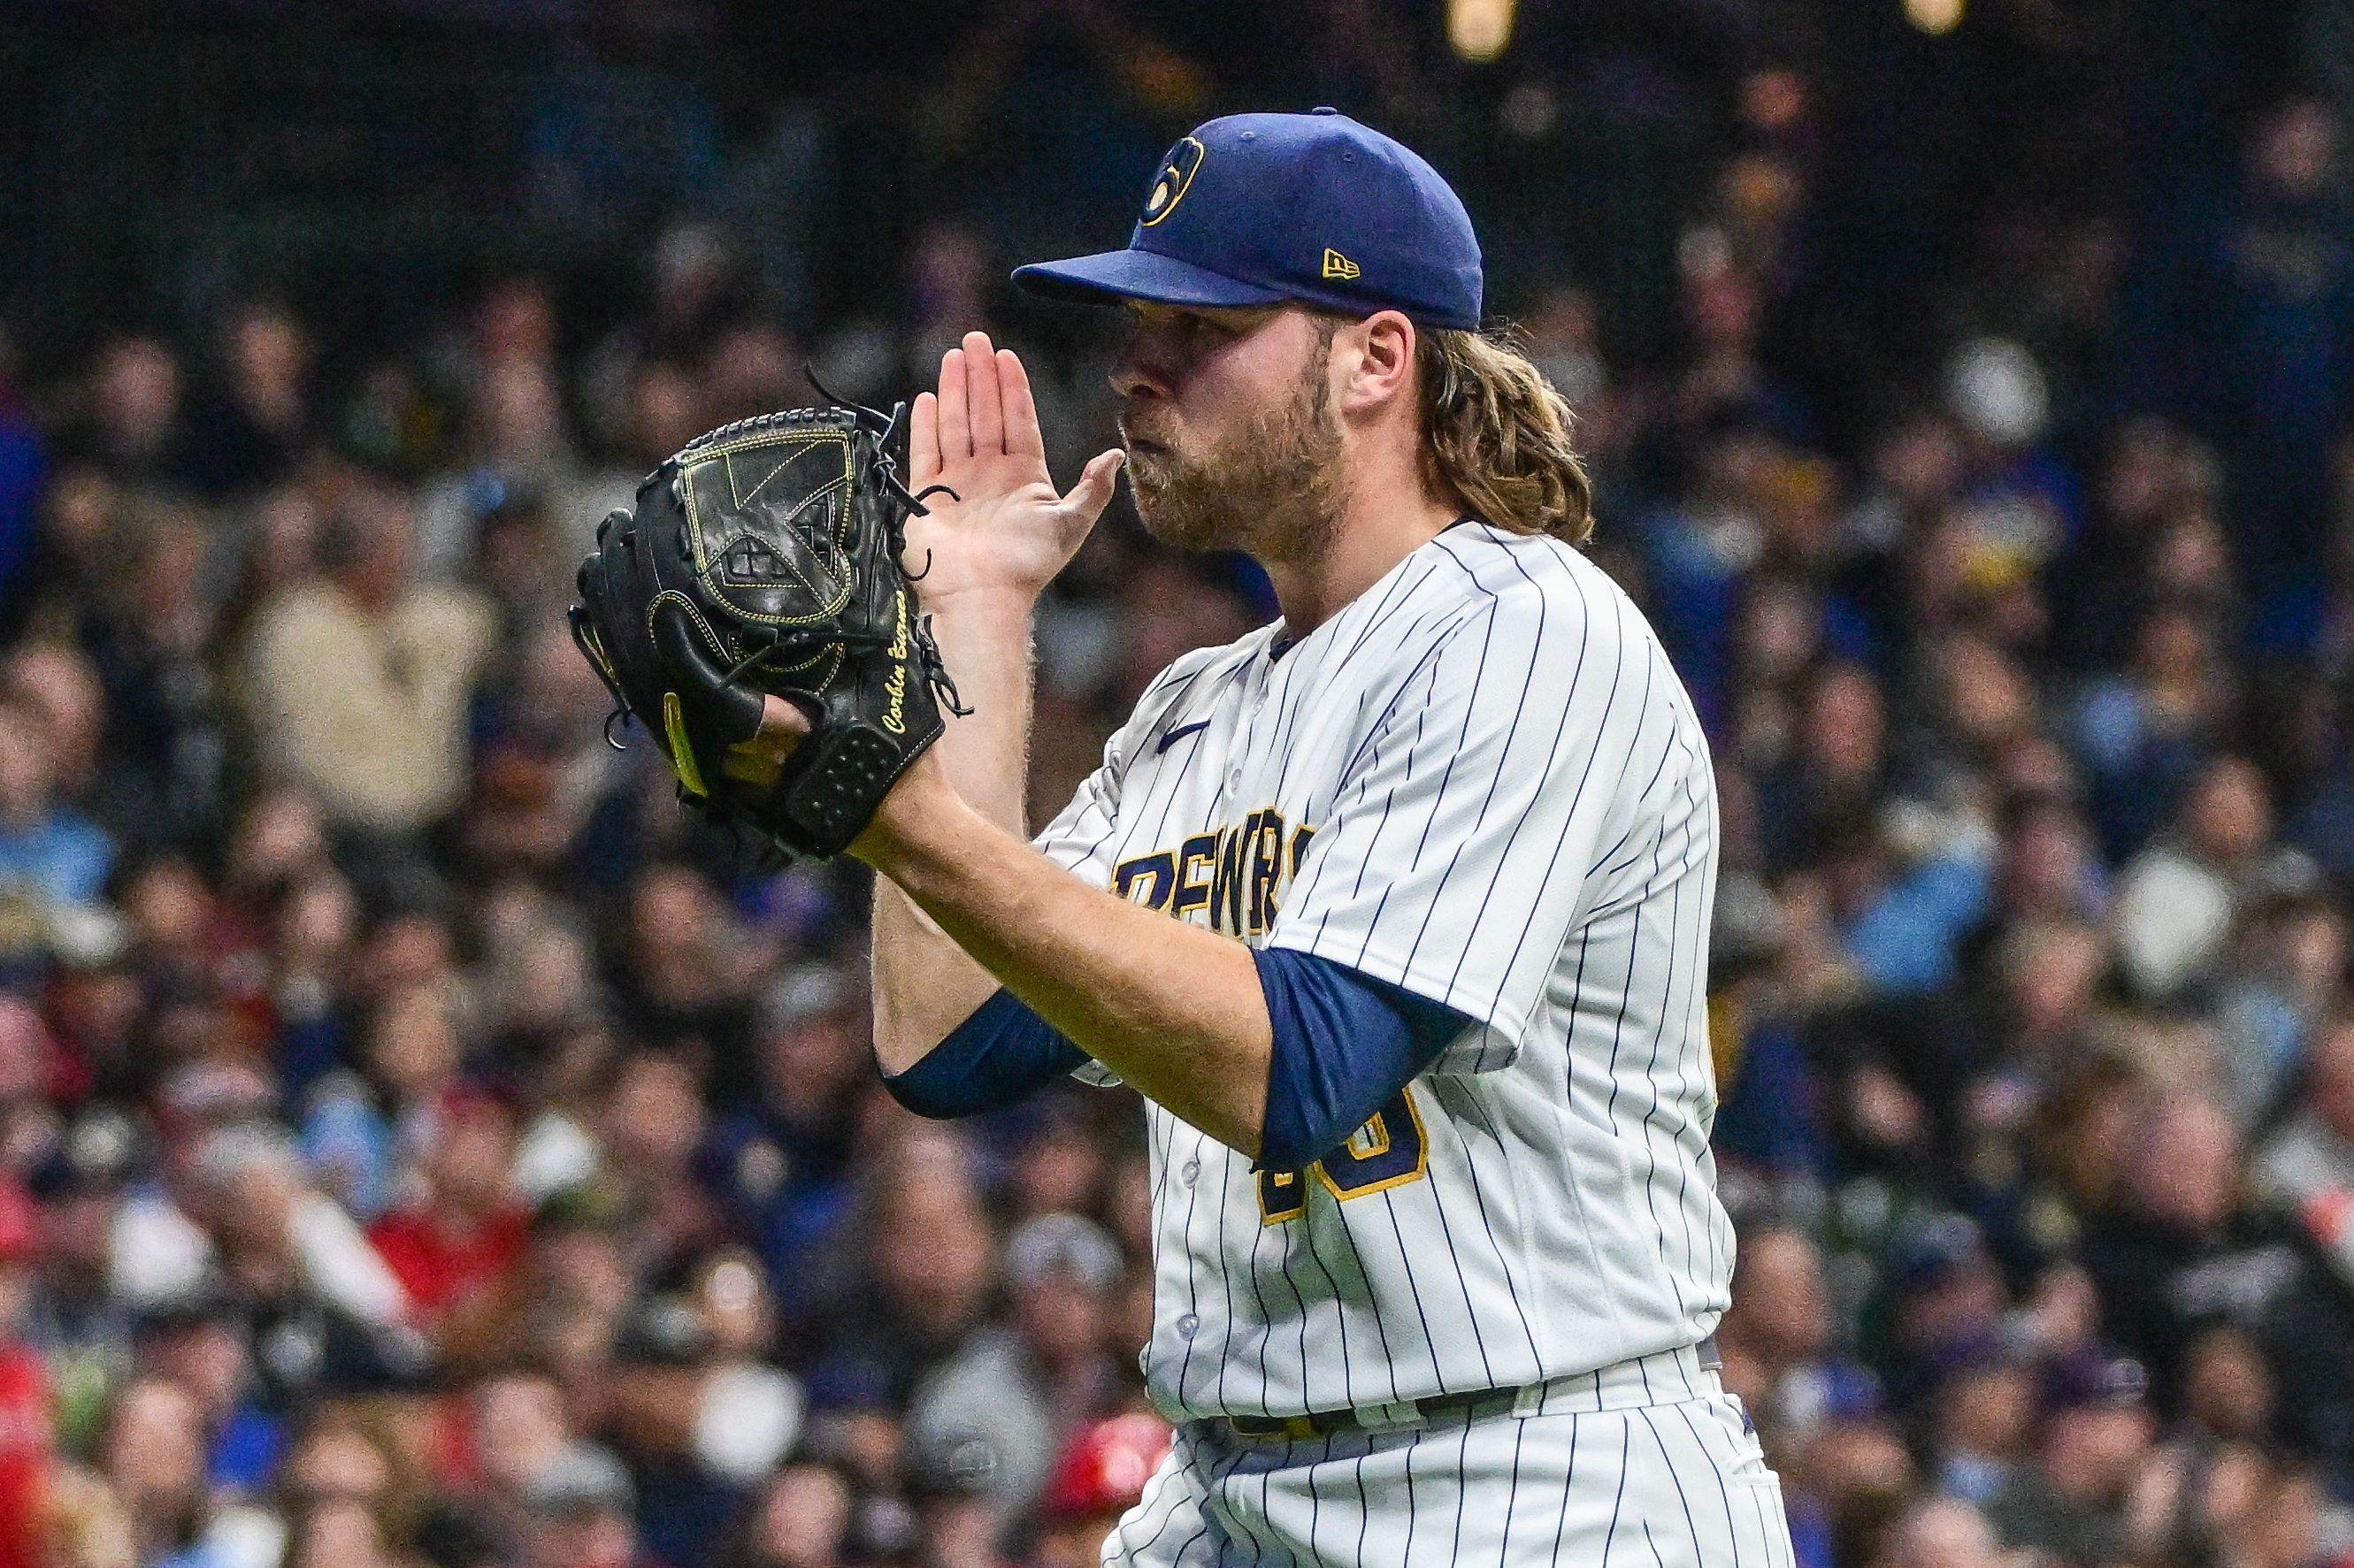 Corbin Burnes ejected after arguing in Brewers win vs. Reds